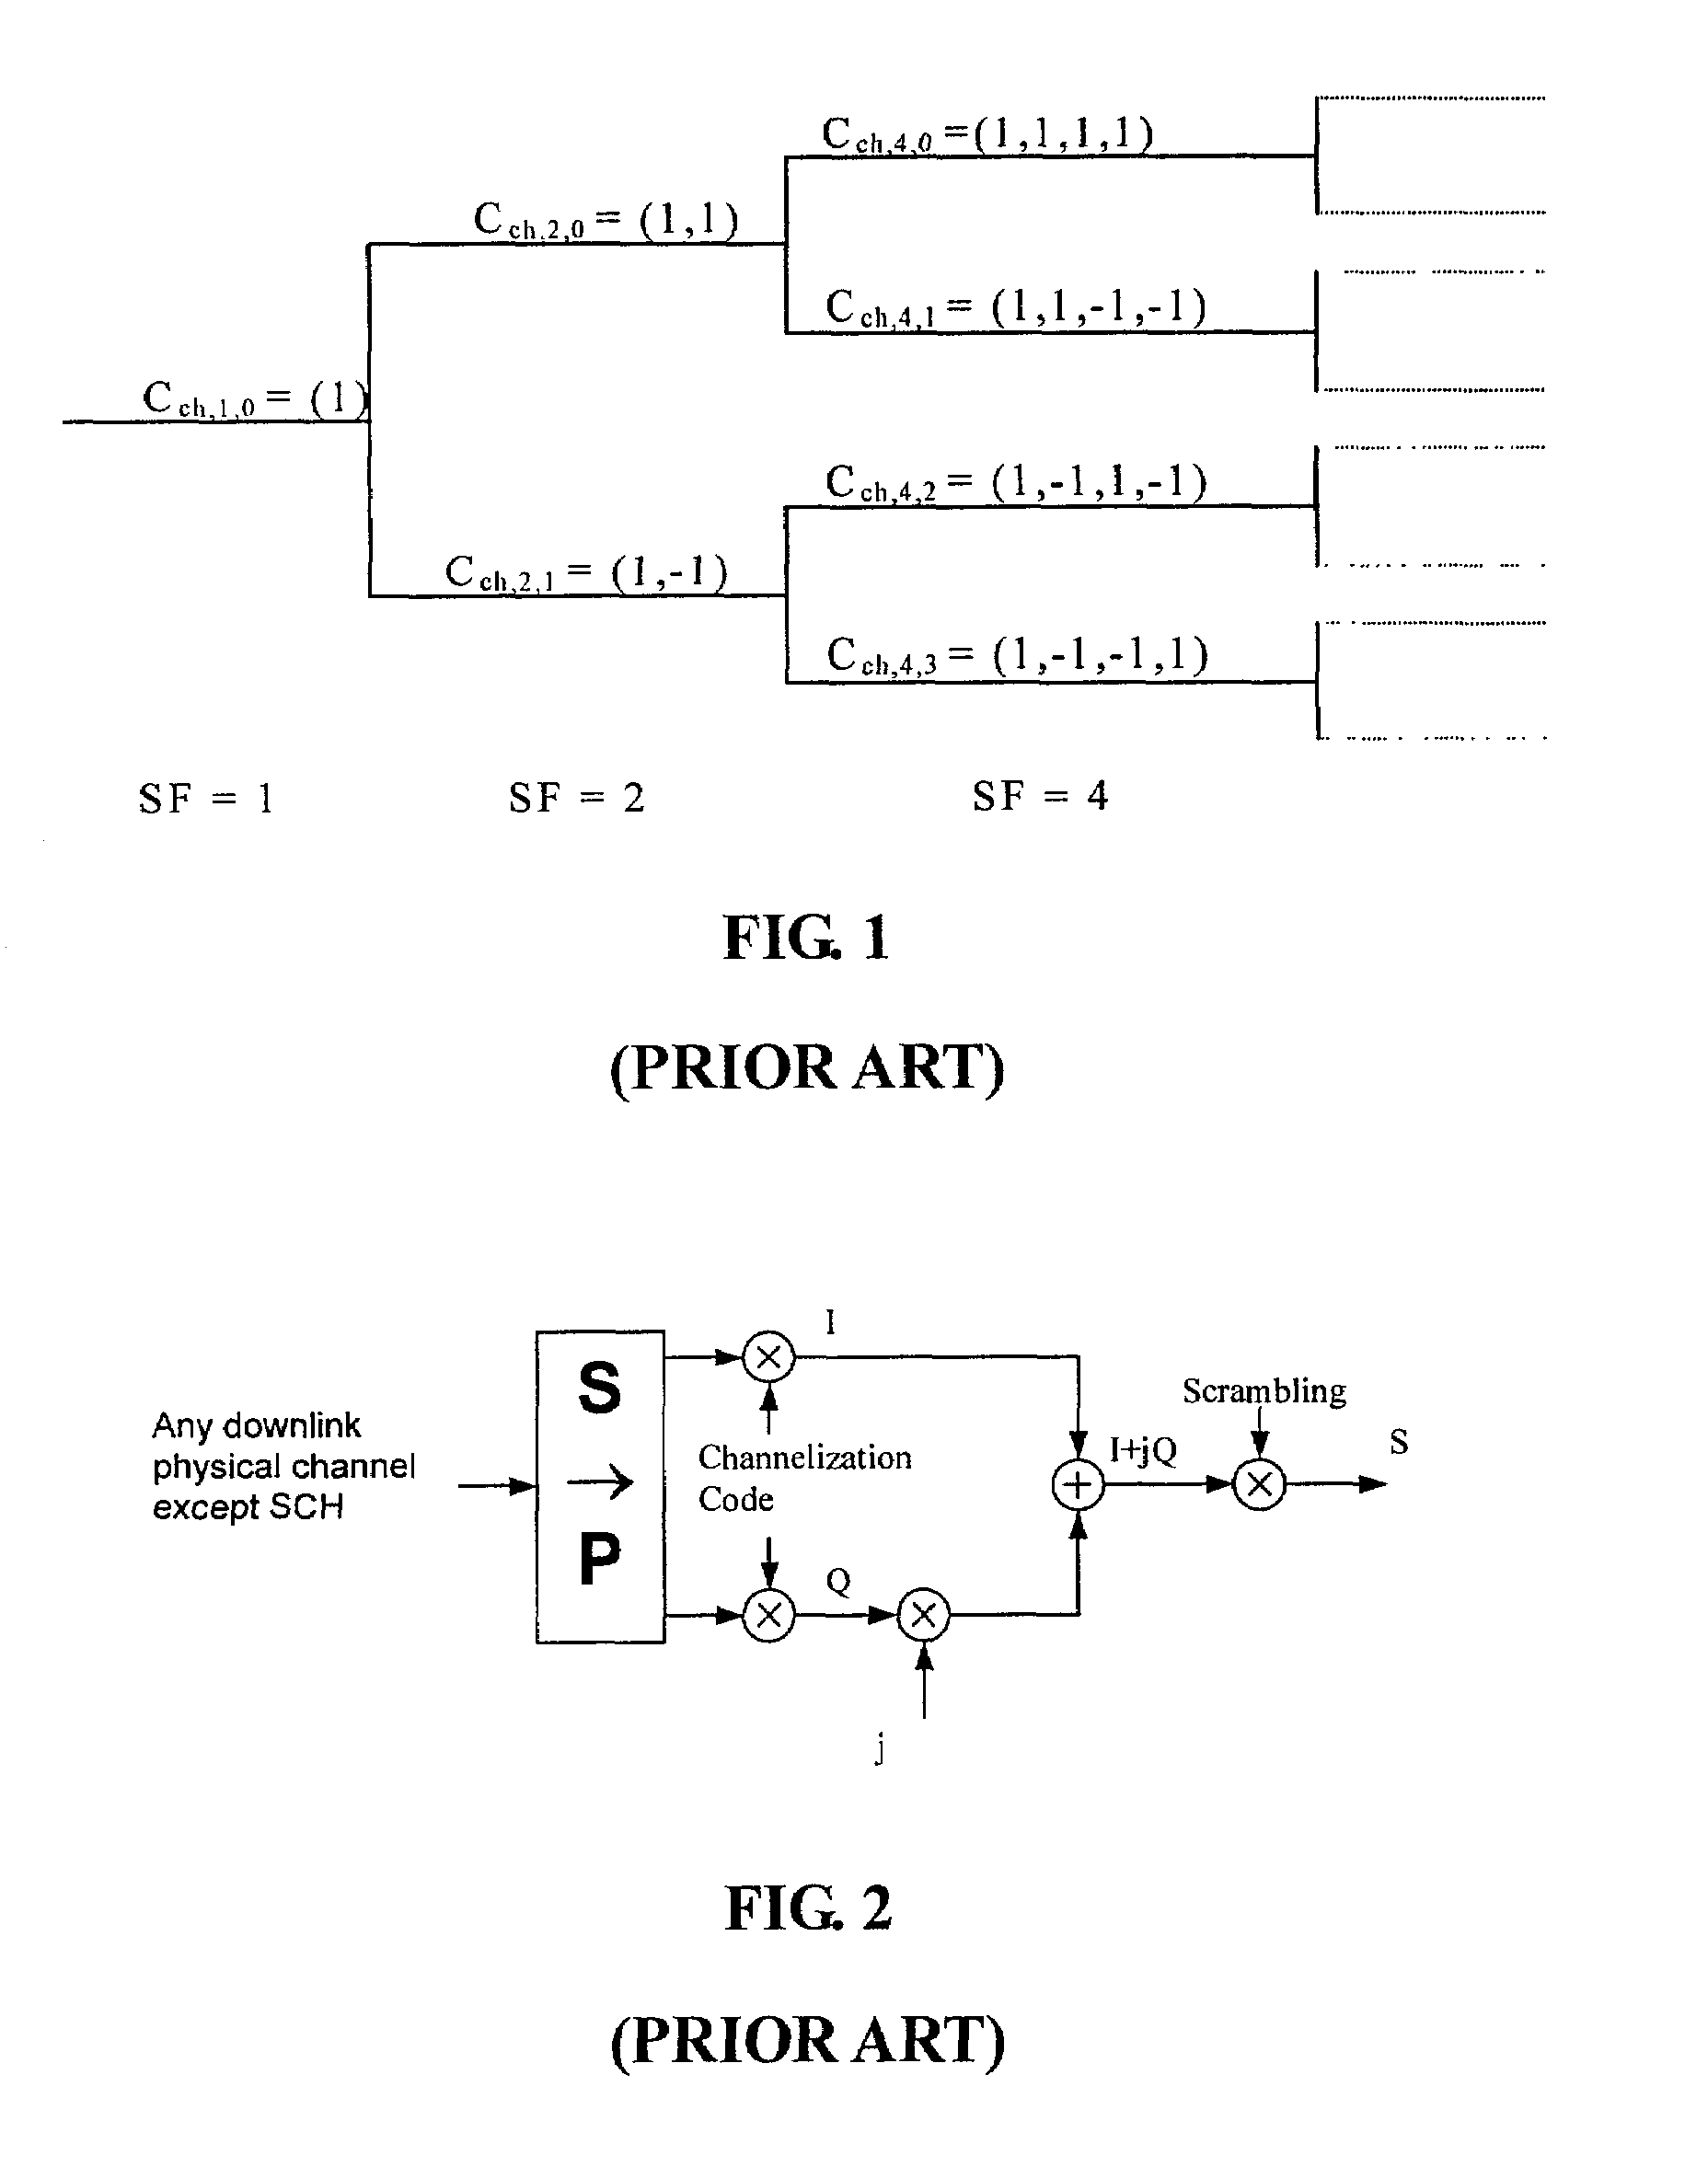 Method and system for downlink channelization code allocation in a UMTS